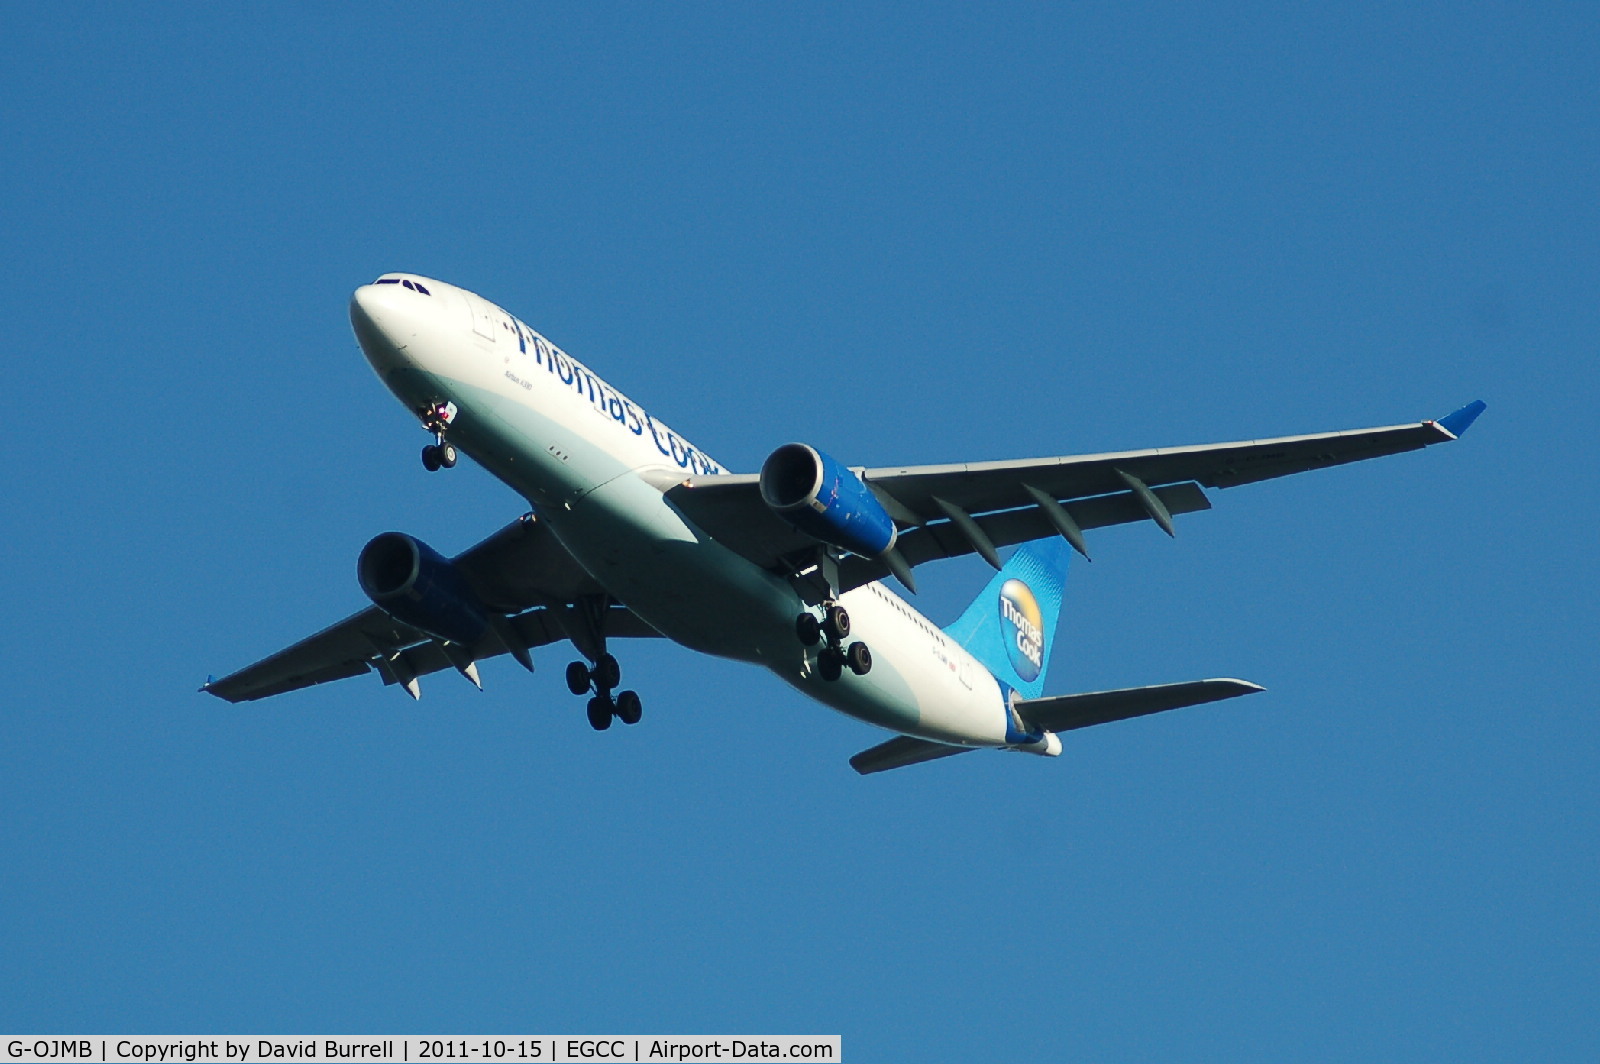 G-OJMB, 2001 Airbus A330-243 C/N 427, Thomas Cook Airbus A330-243 on approach.